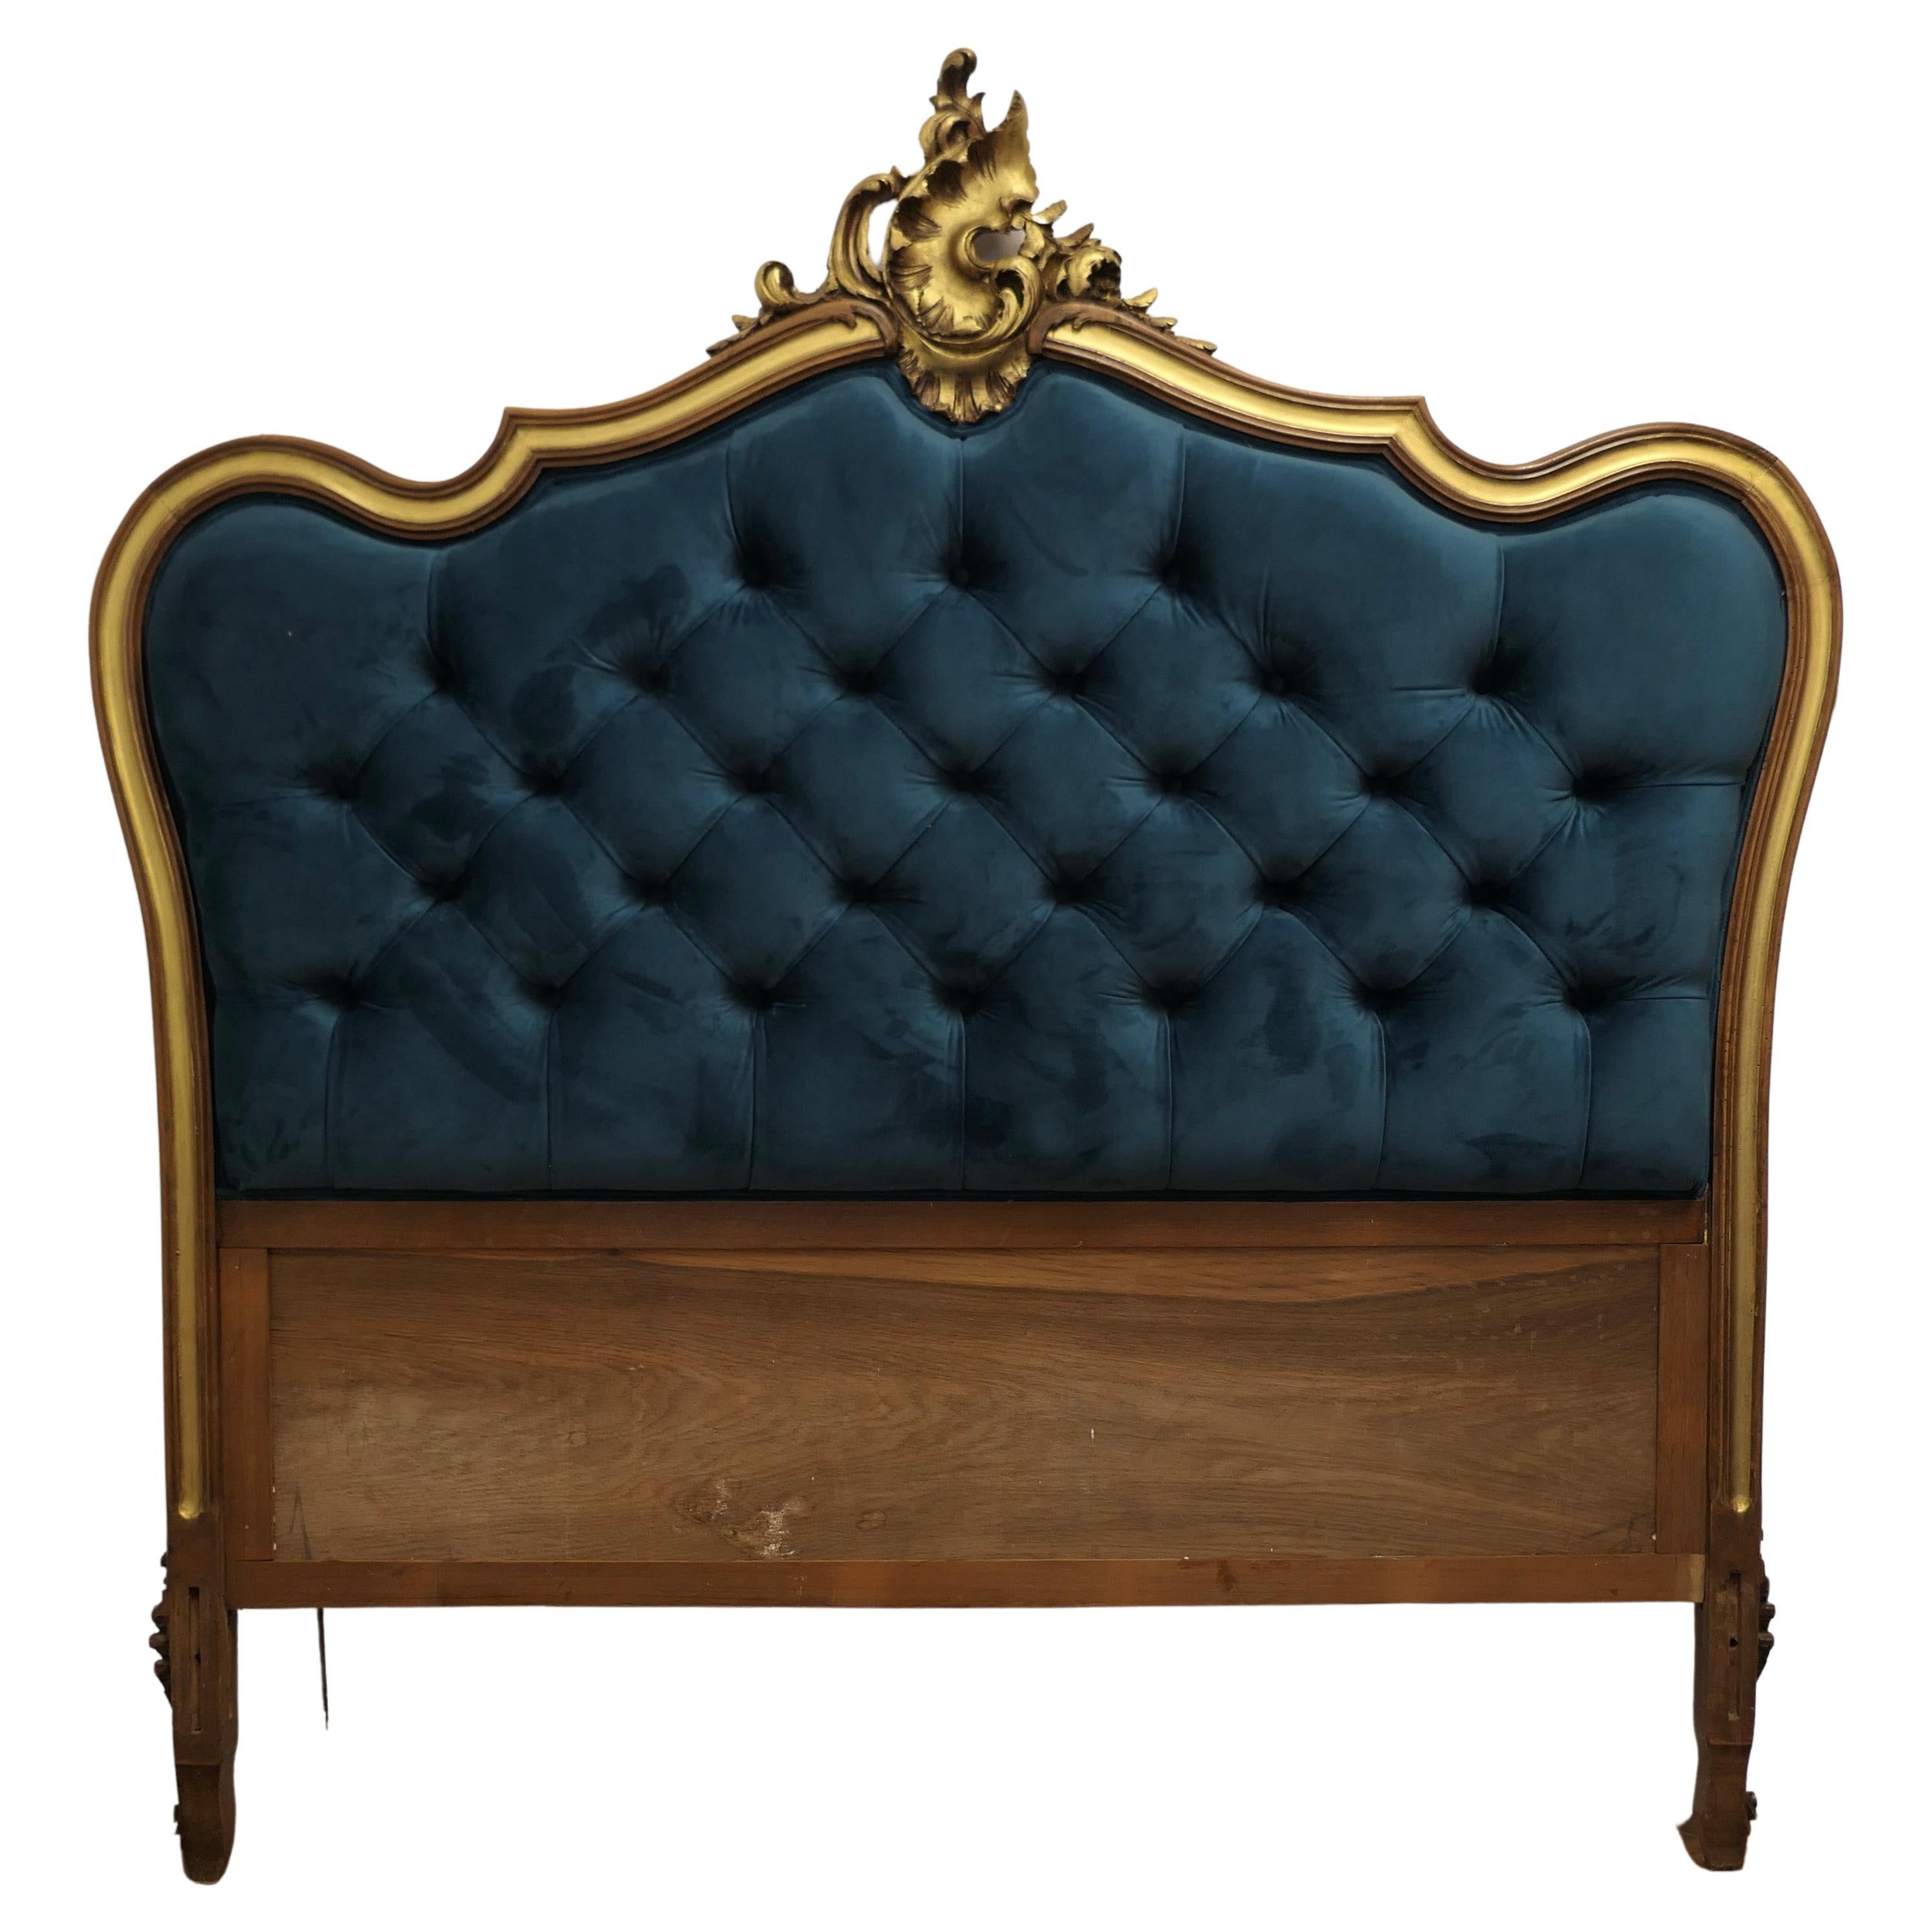 French Upholstered Bed Head, Deeply Buttoned in Teal Velvet